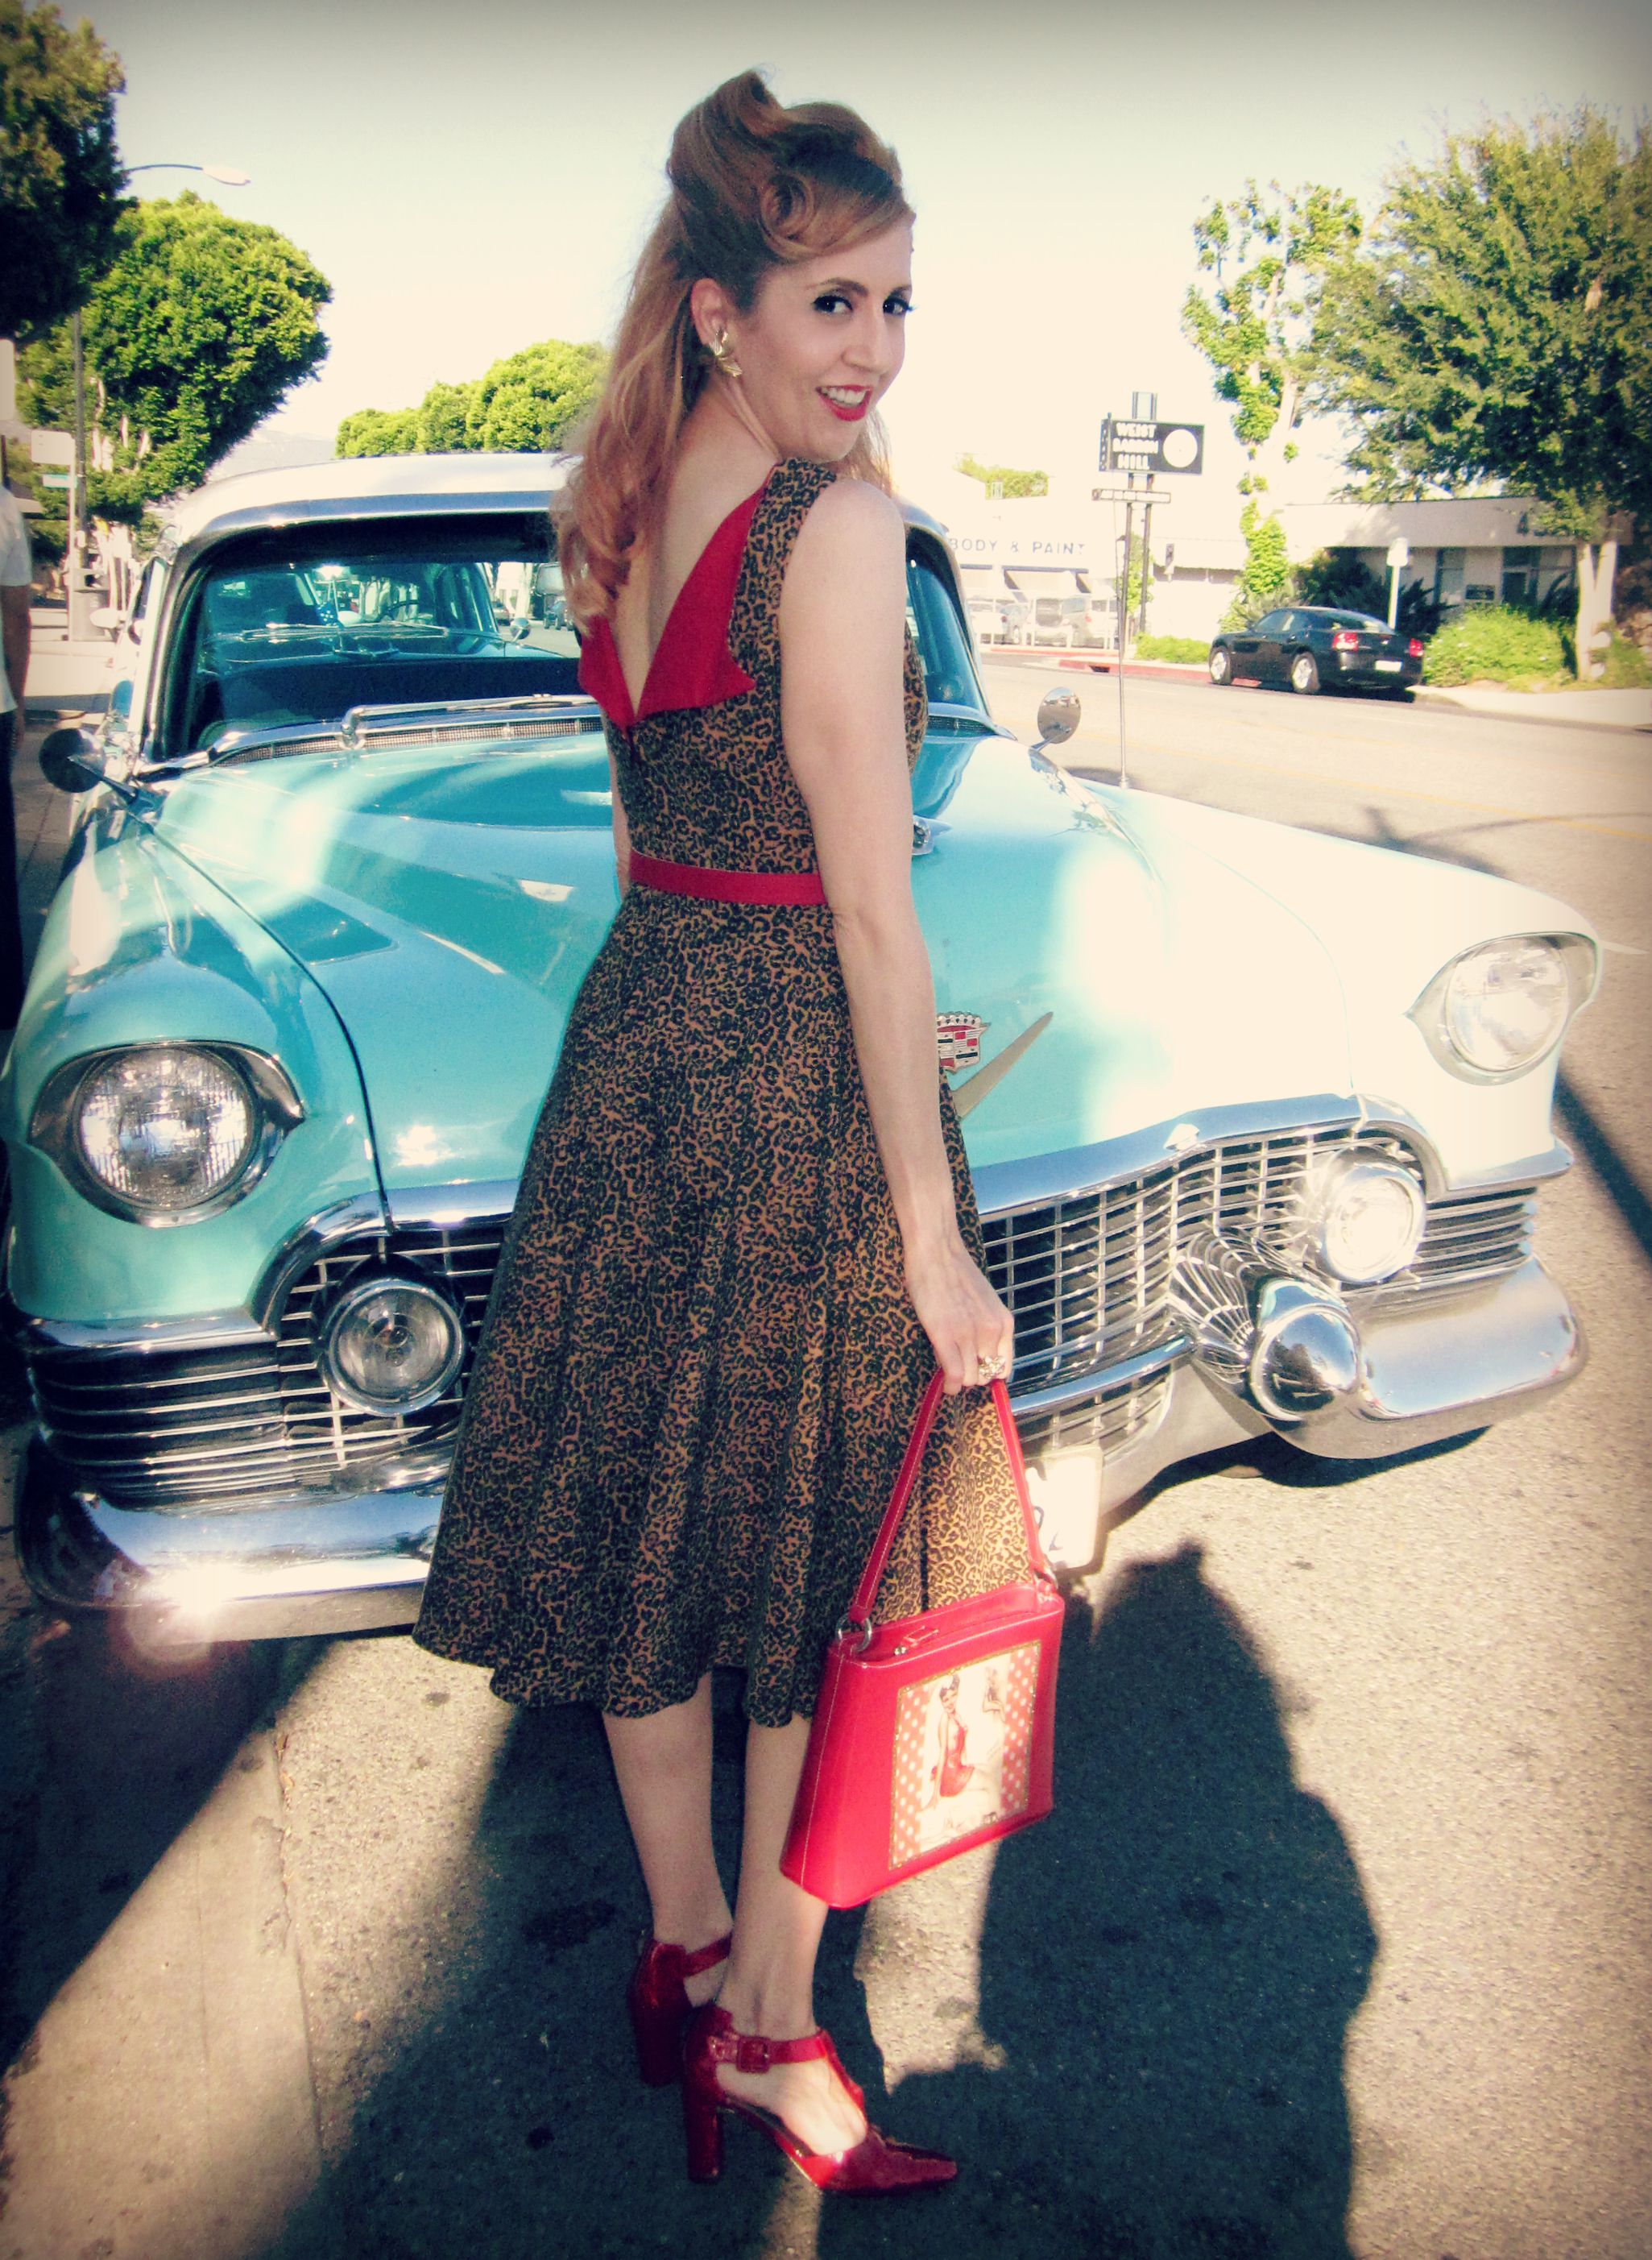 Stiletto City - Summer Dance Party: Tips on Dressing Rockabilly Style